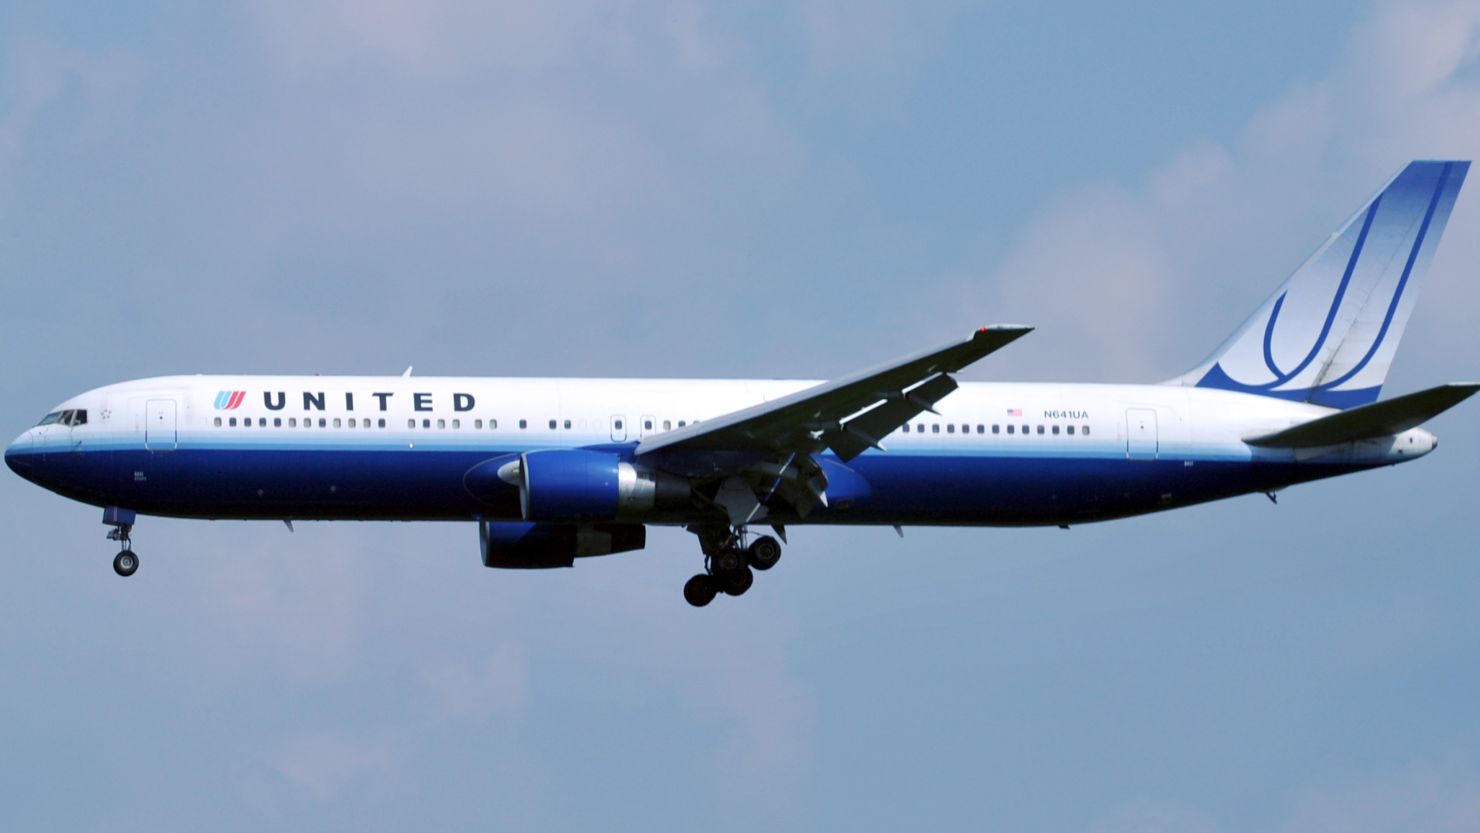 United mistakenly offered return flights to Hong Kong for four air miles and $43.